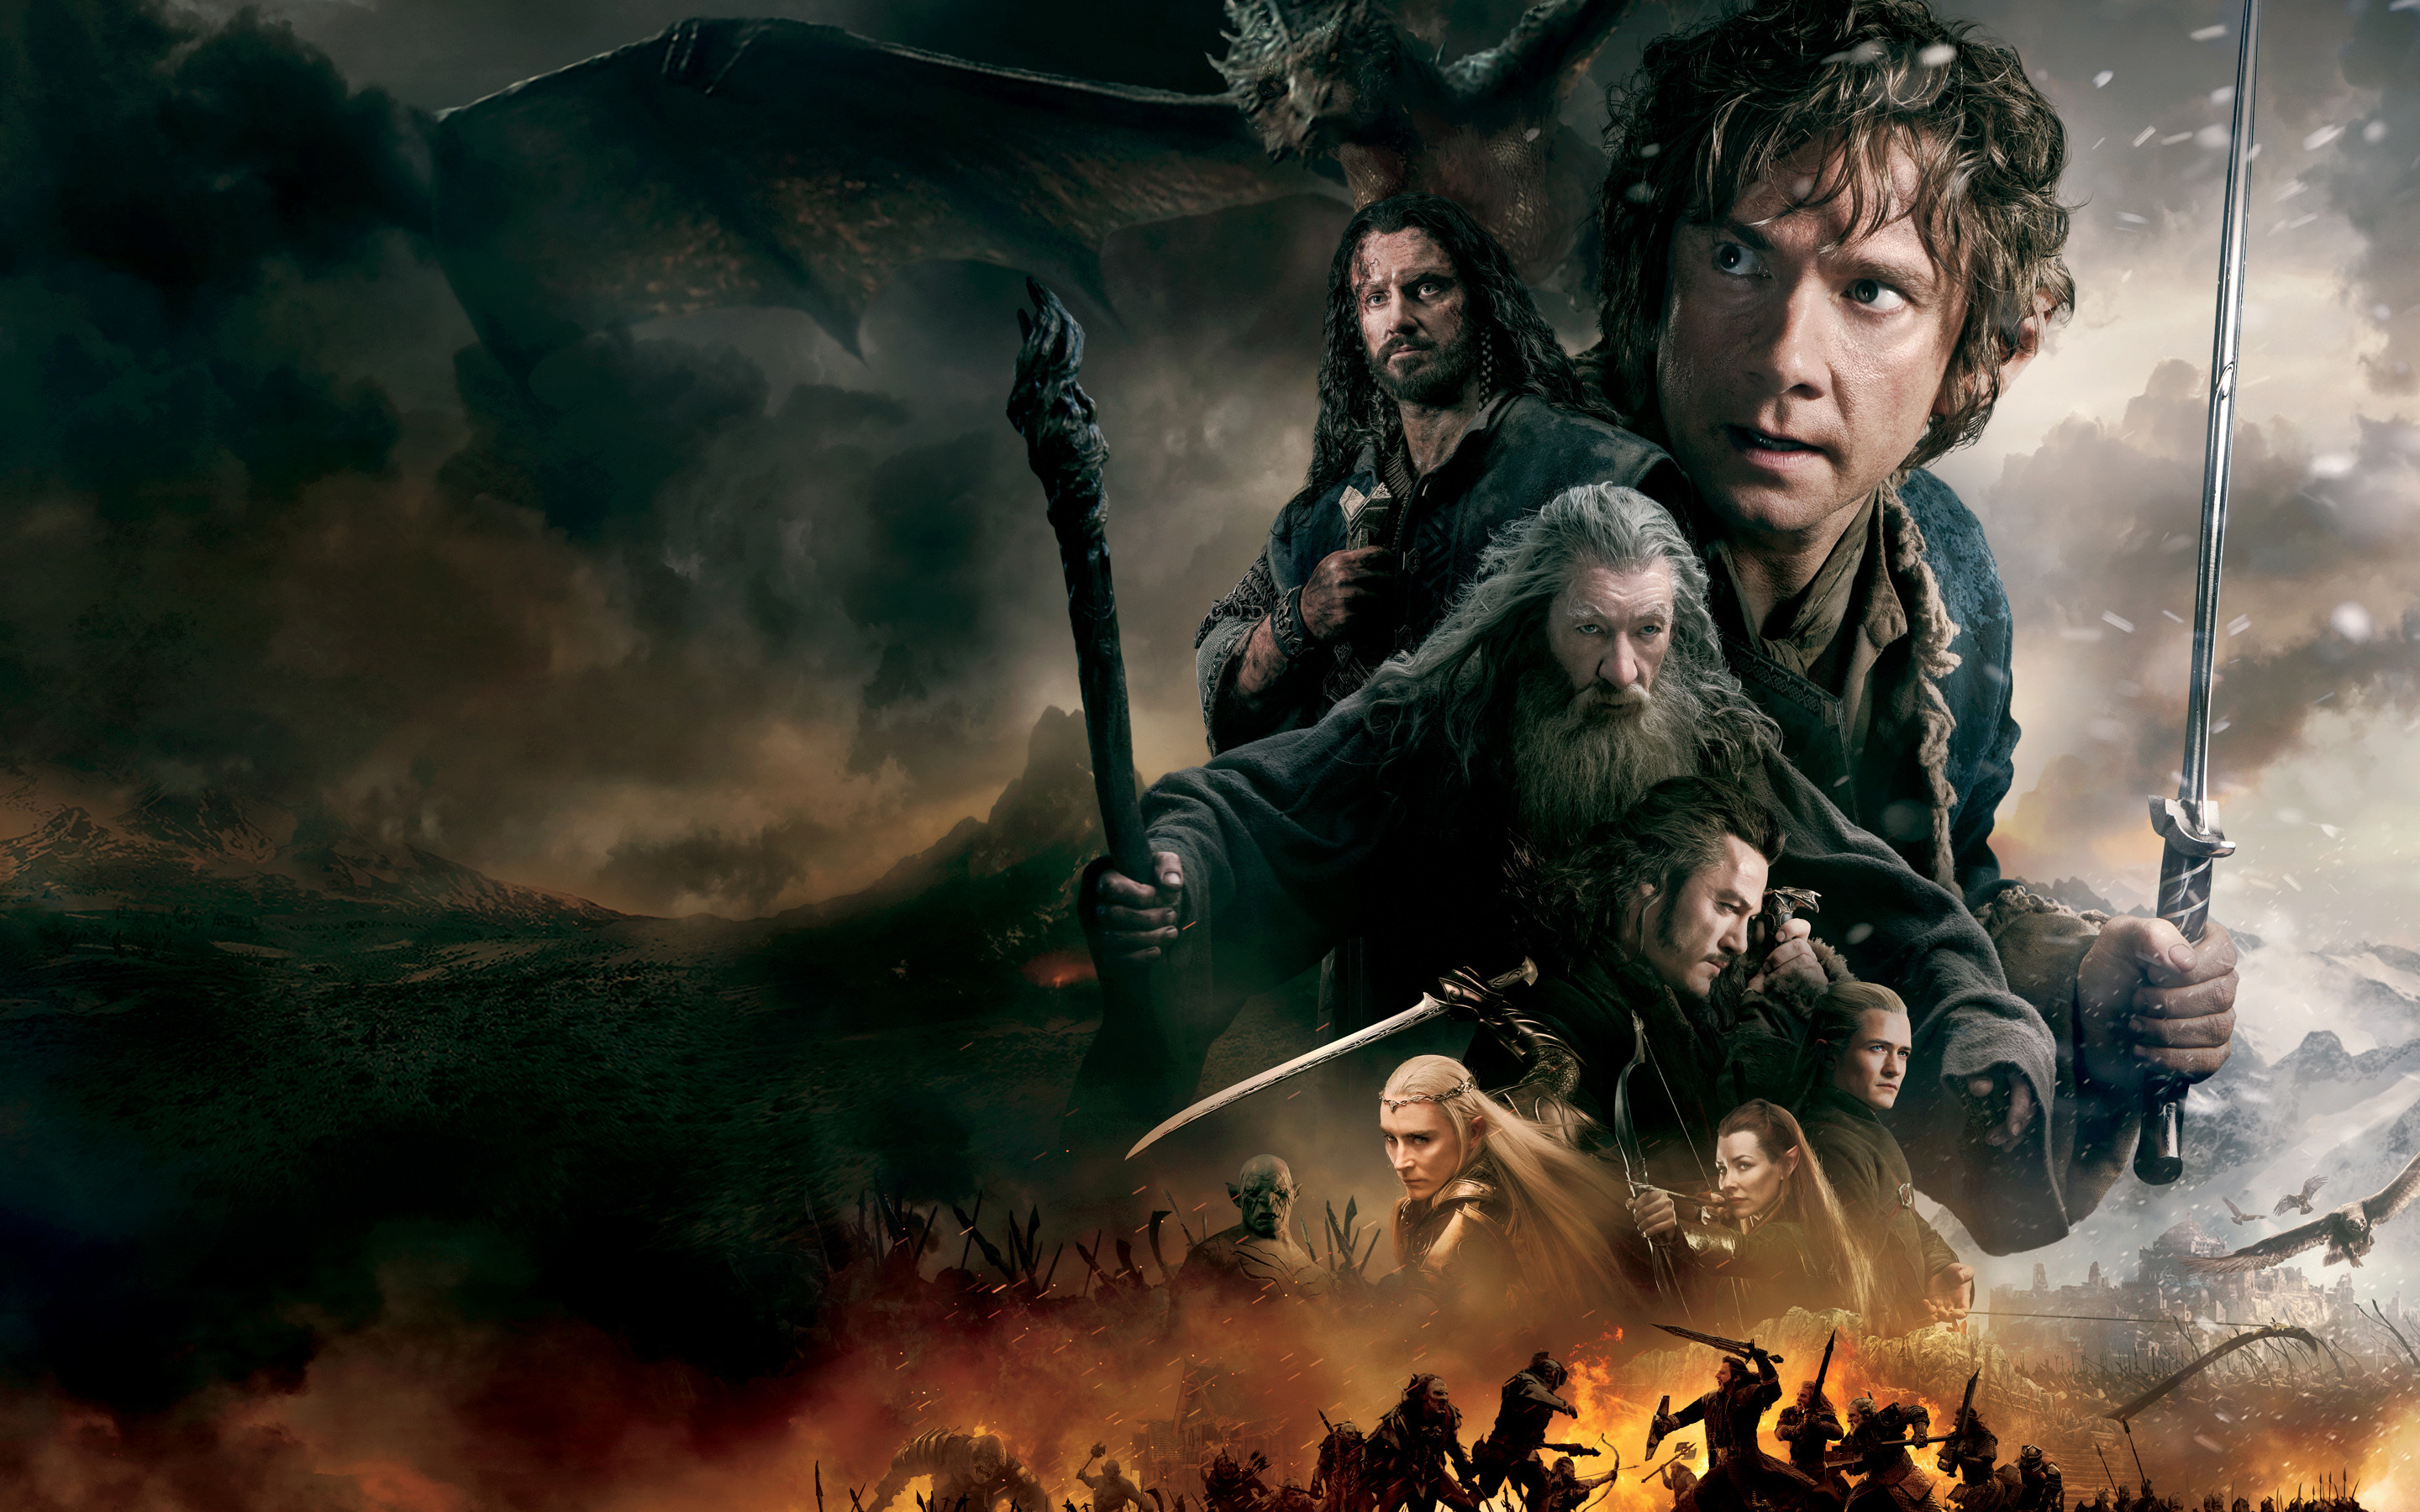 2880x1800 The Hobbit The Battle of the Five Armies Movie wallpapers Wallpapers) – Art  Wallpapers